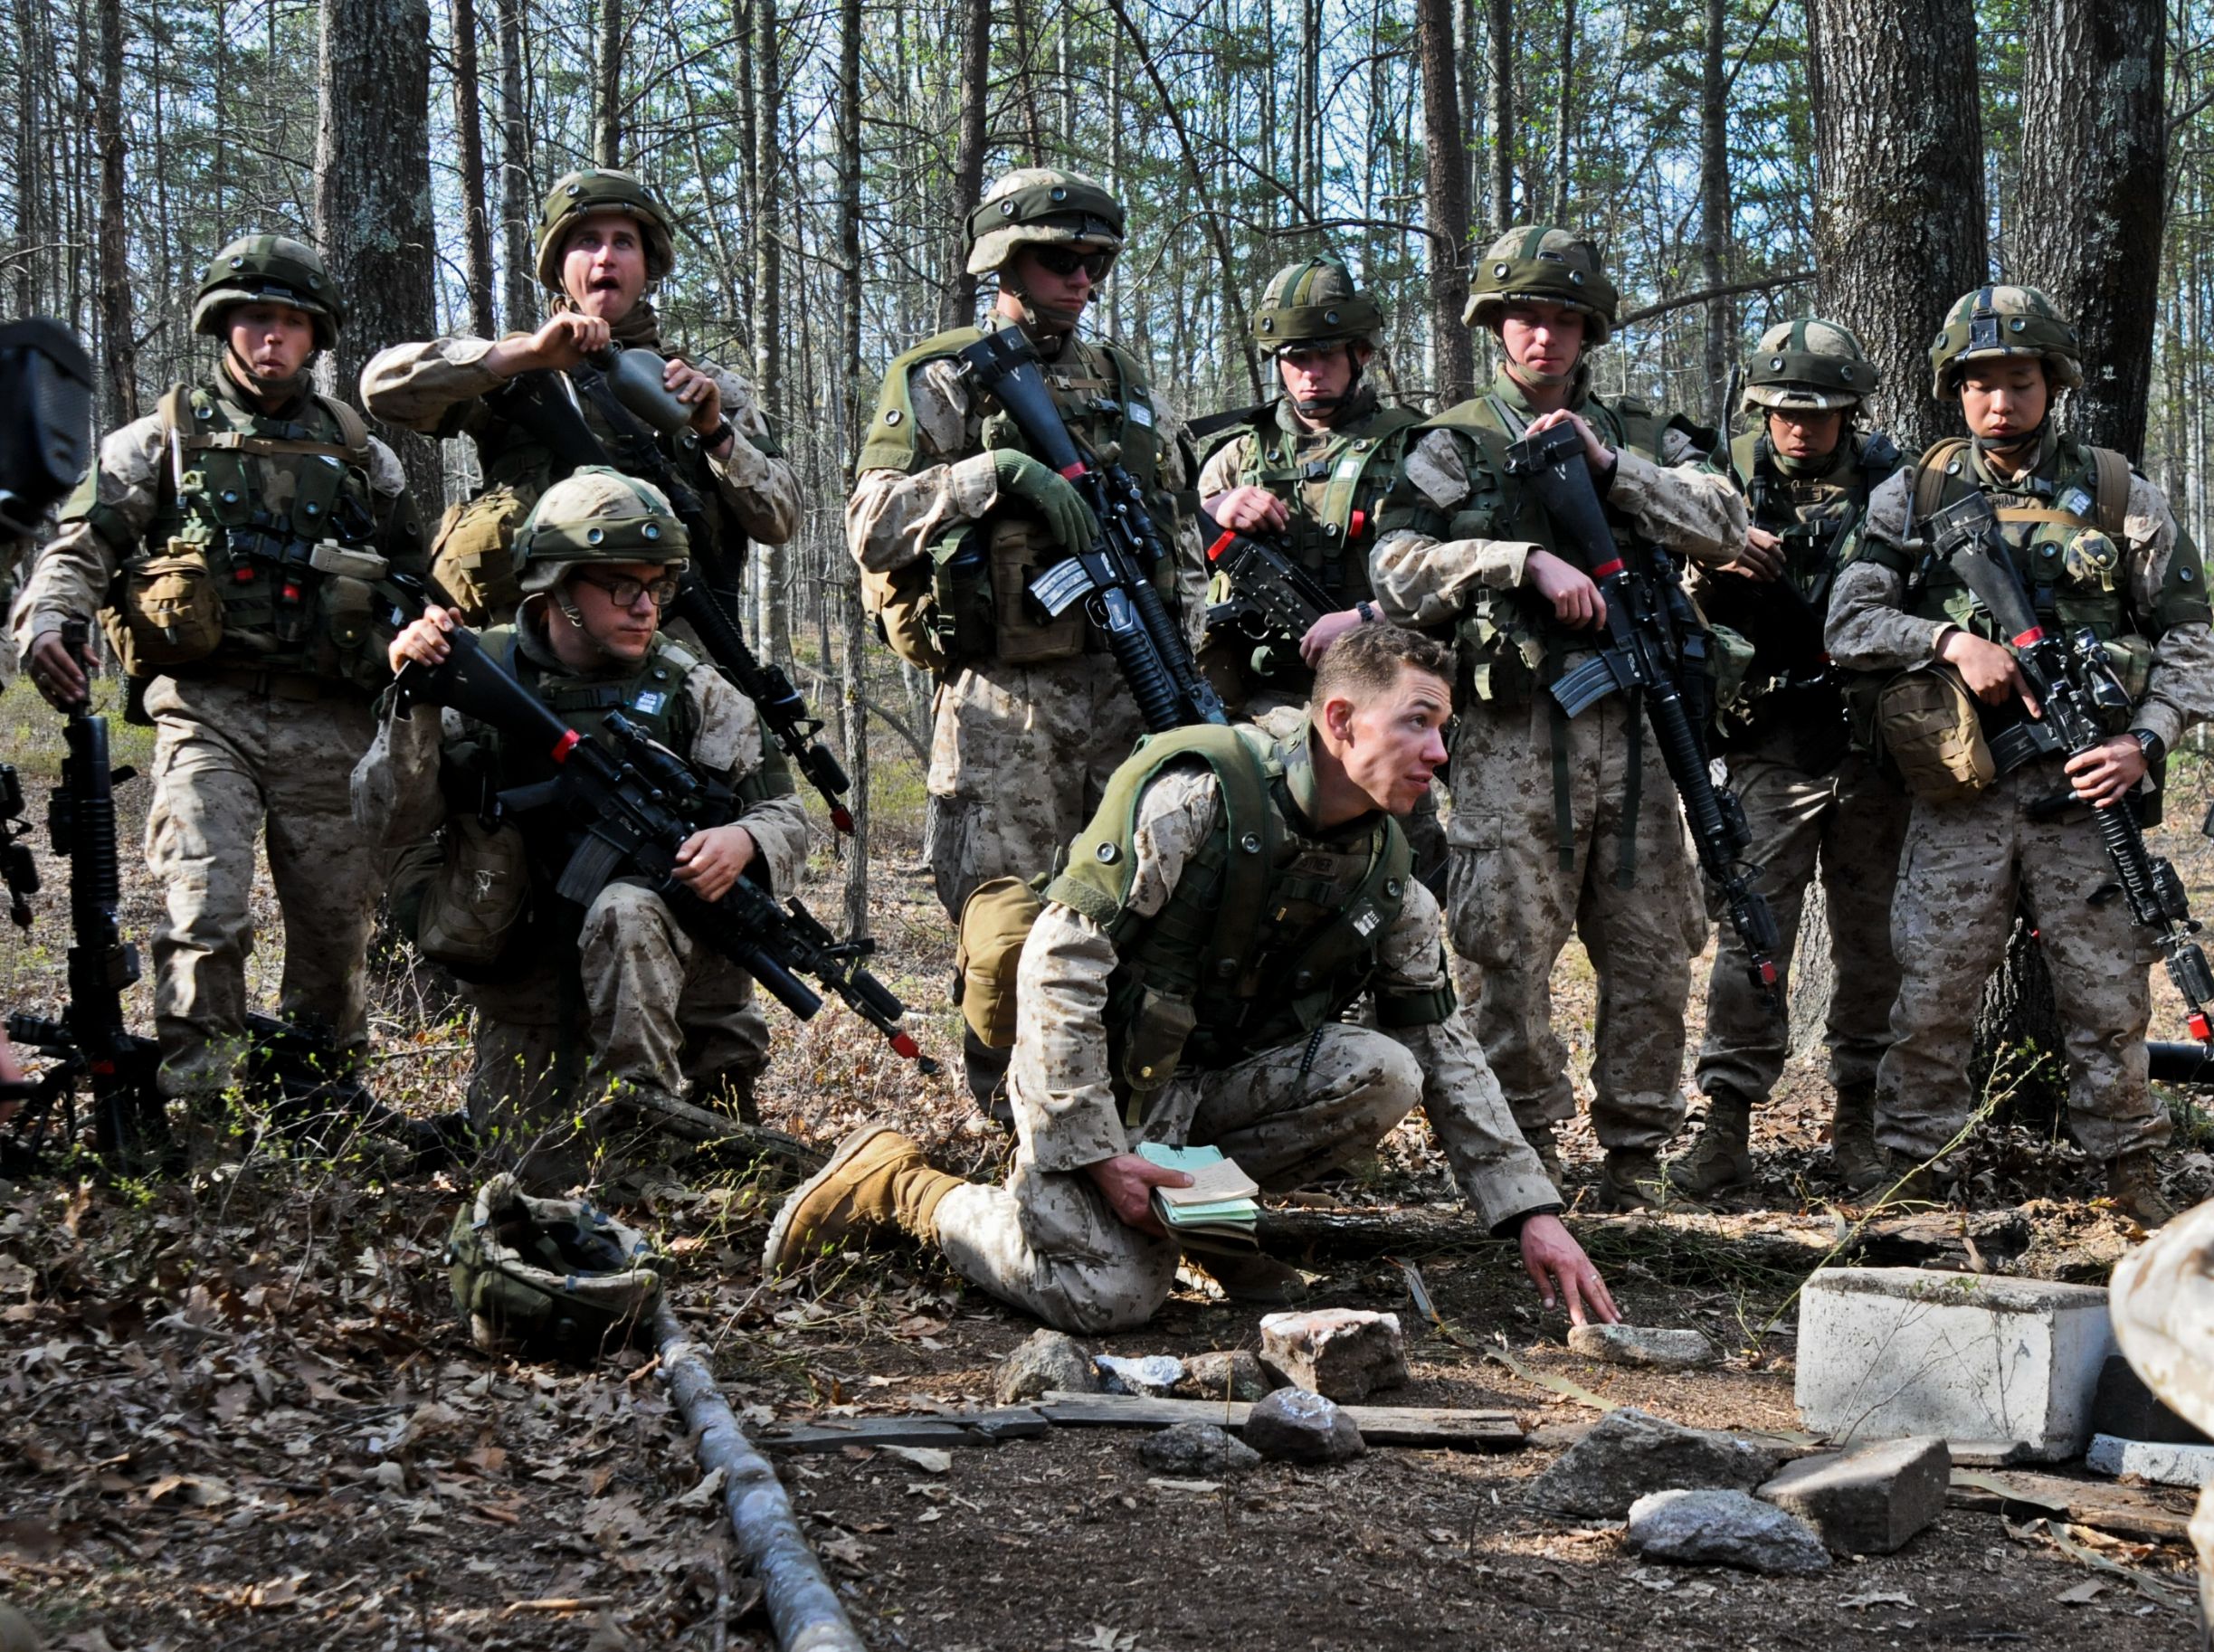 2nd Lt. Justin Kistner, 5th Platoon, Alpha Company, The Basic School, asks a question over the scheme of maneuver during a training exercise on military operations in urban terrain at Camp Barrett, March 27. Fifth platoon was given the objective of clearing and securing the buildings of all enemy insurgents.